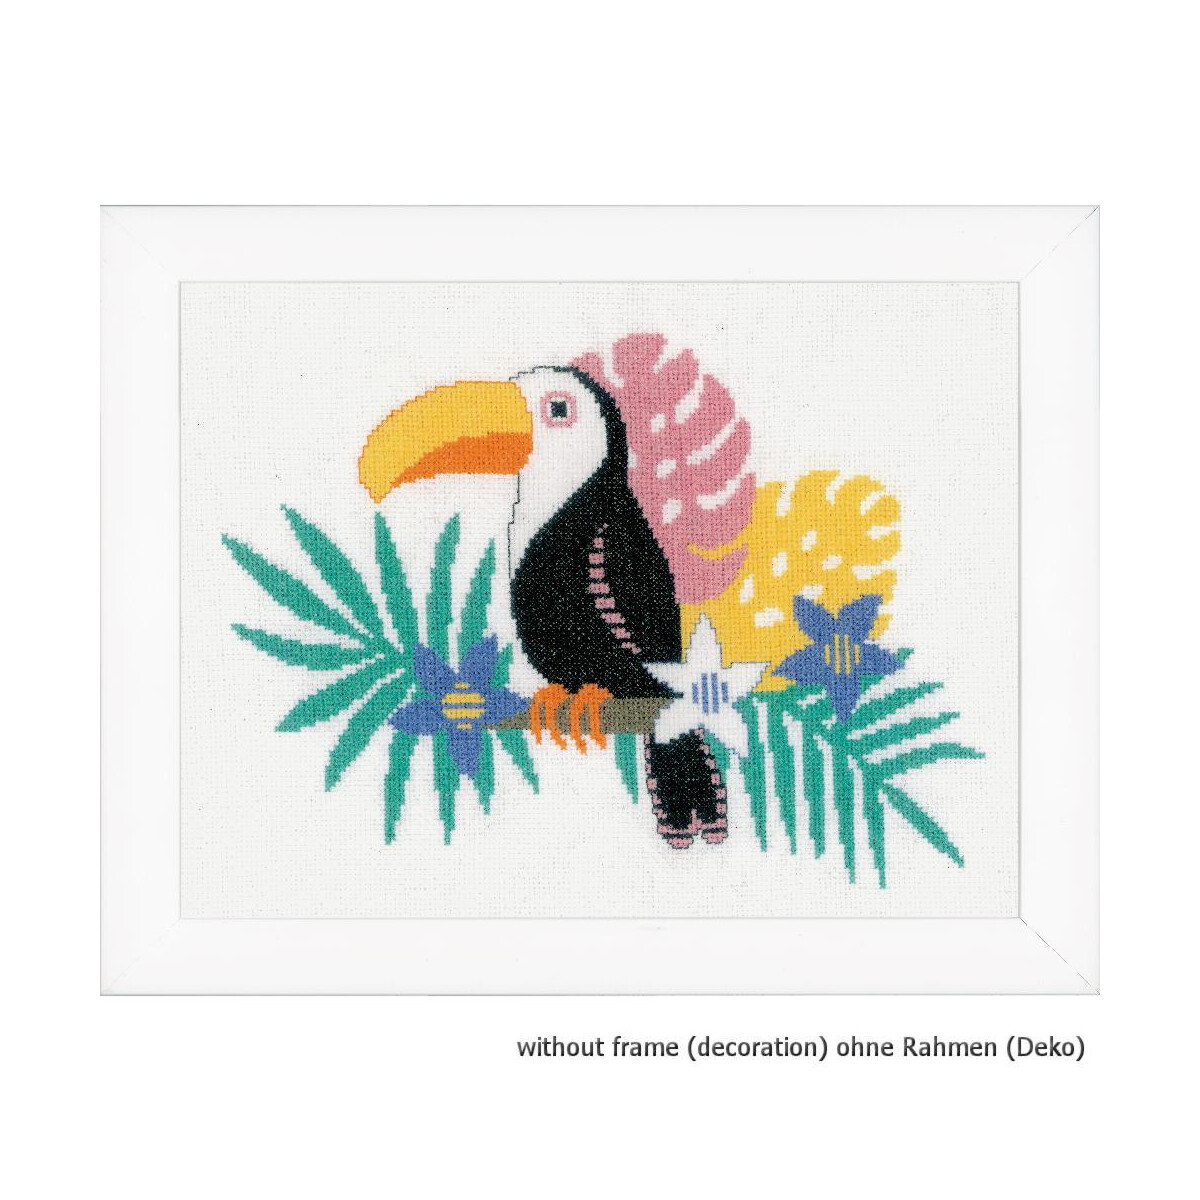 Vervaco counted cross stitch kit Toucan, DIY